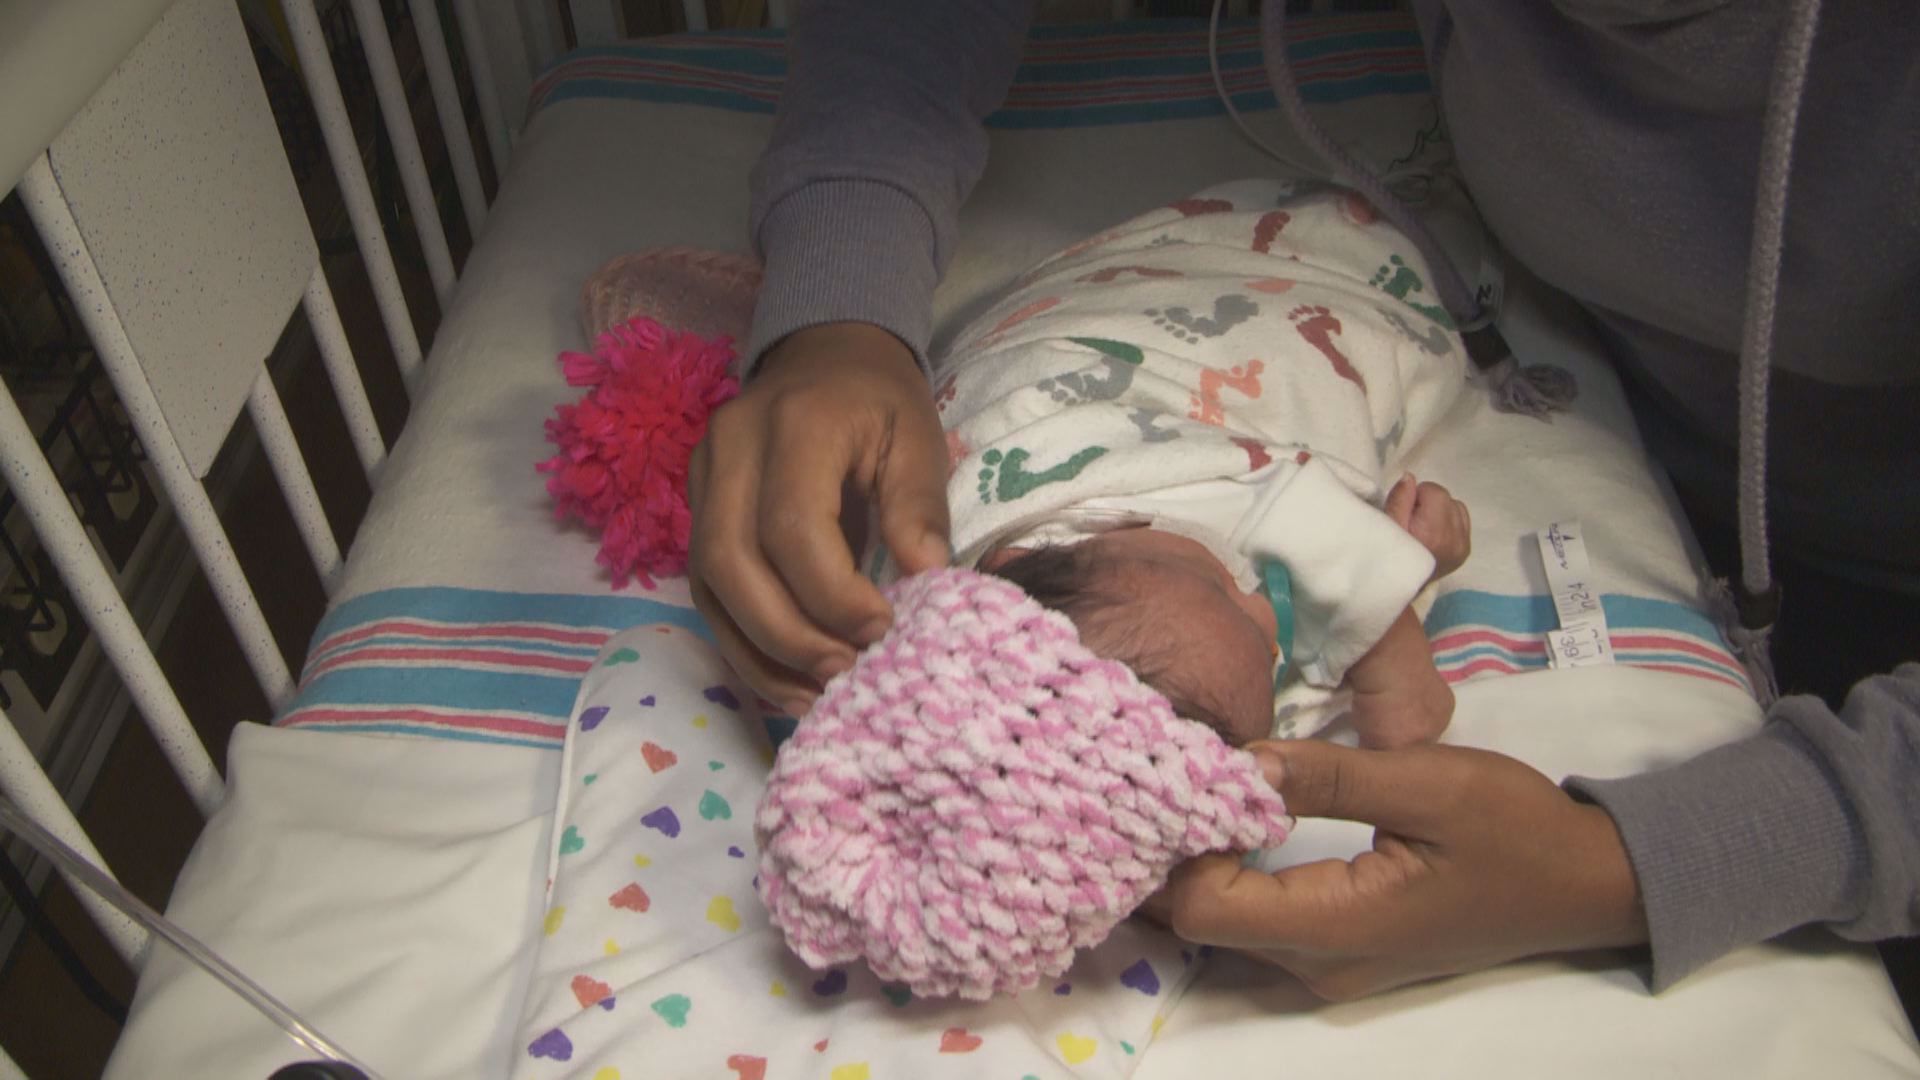 Middle and high school students deliver tiny knit hats for babies